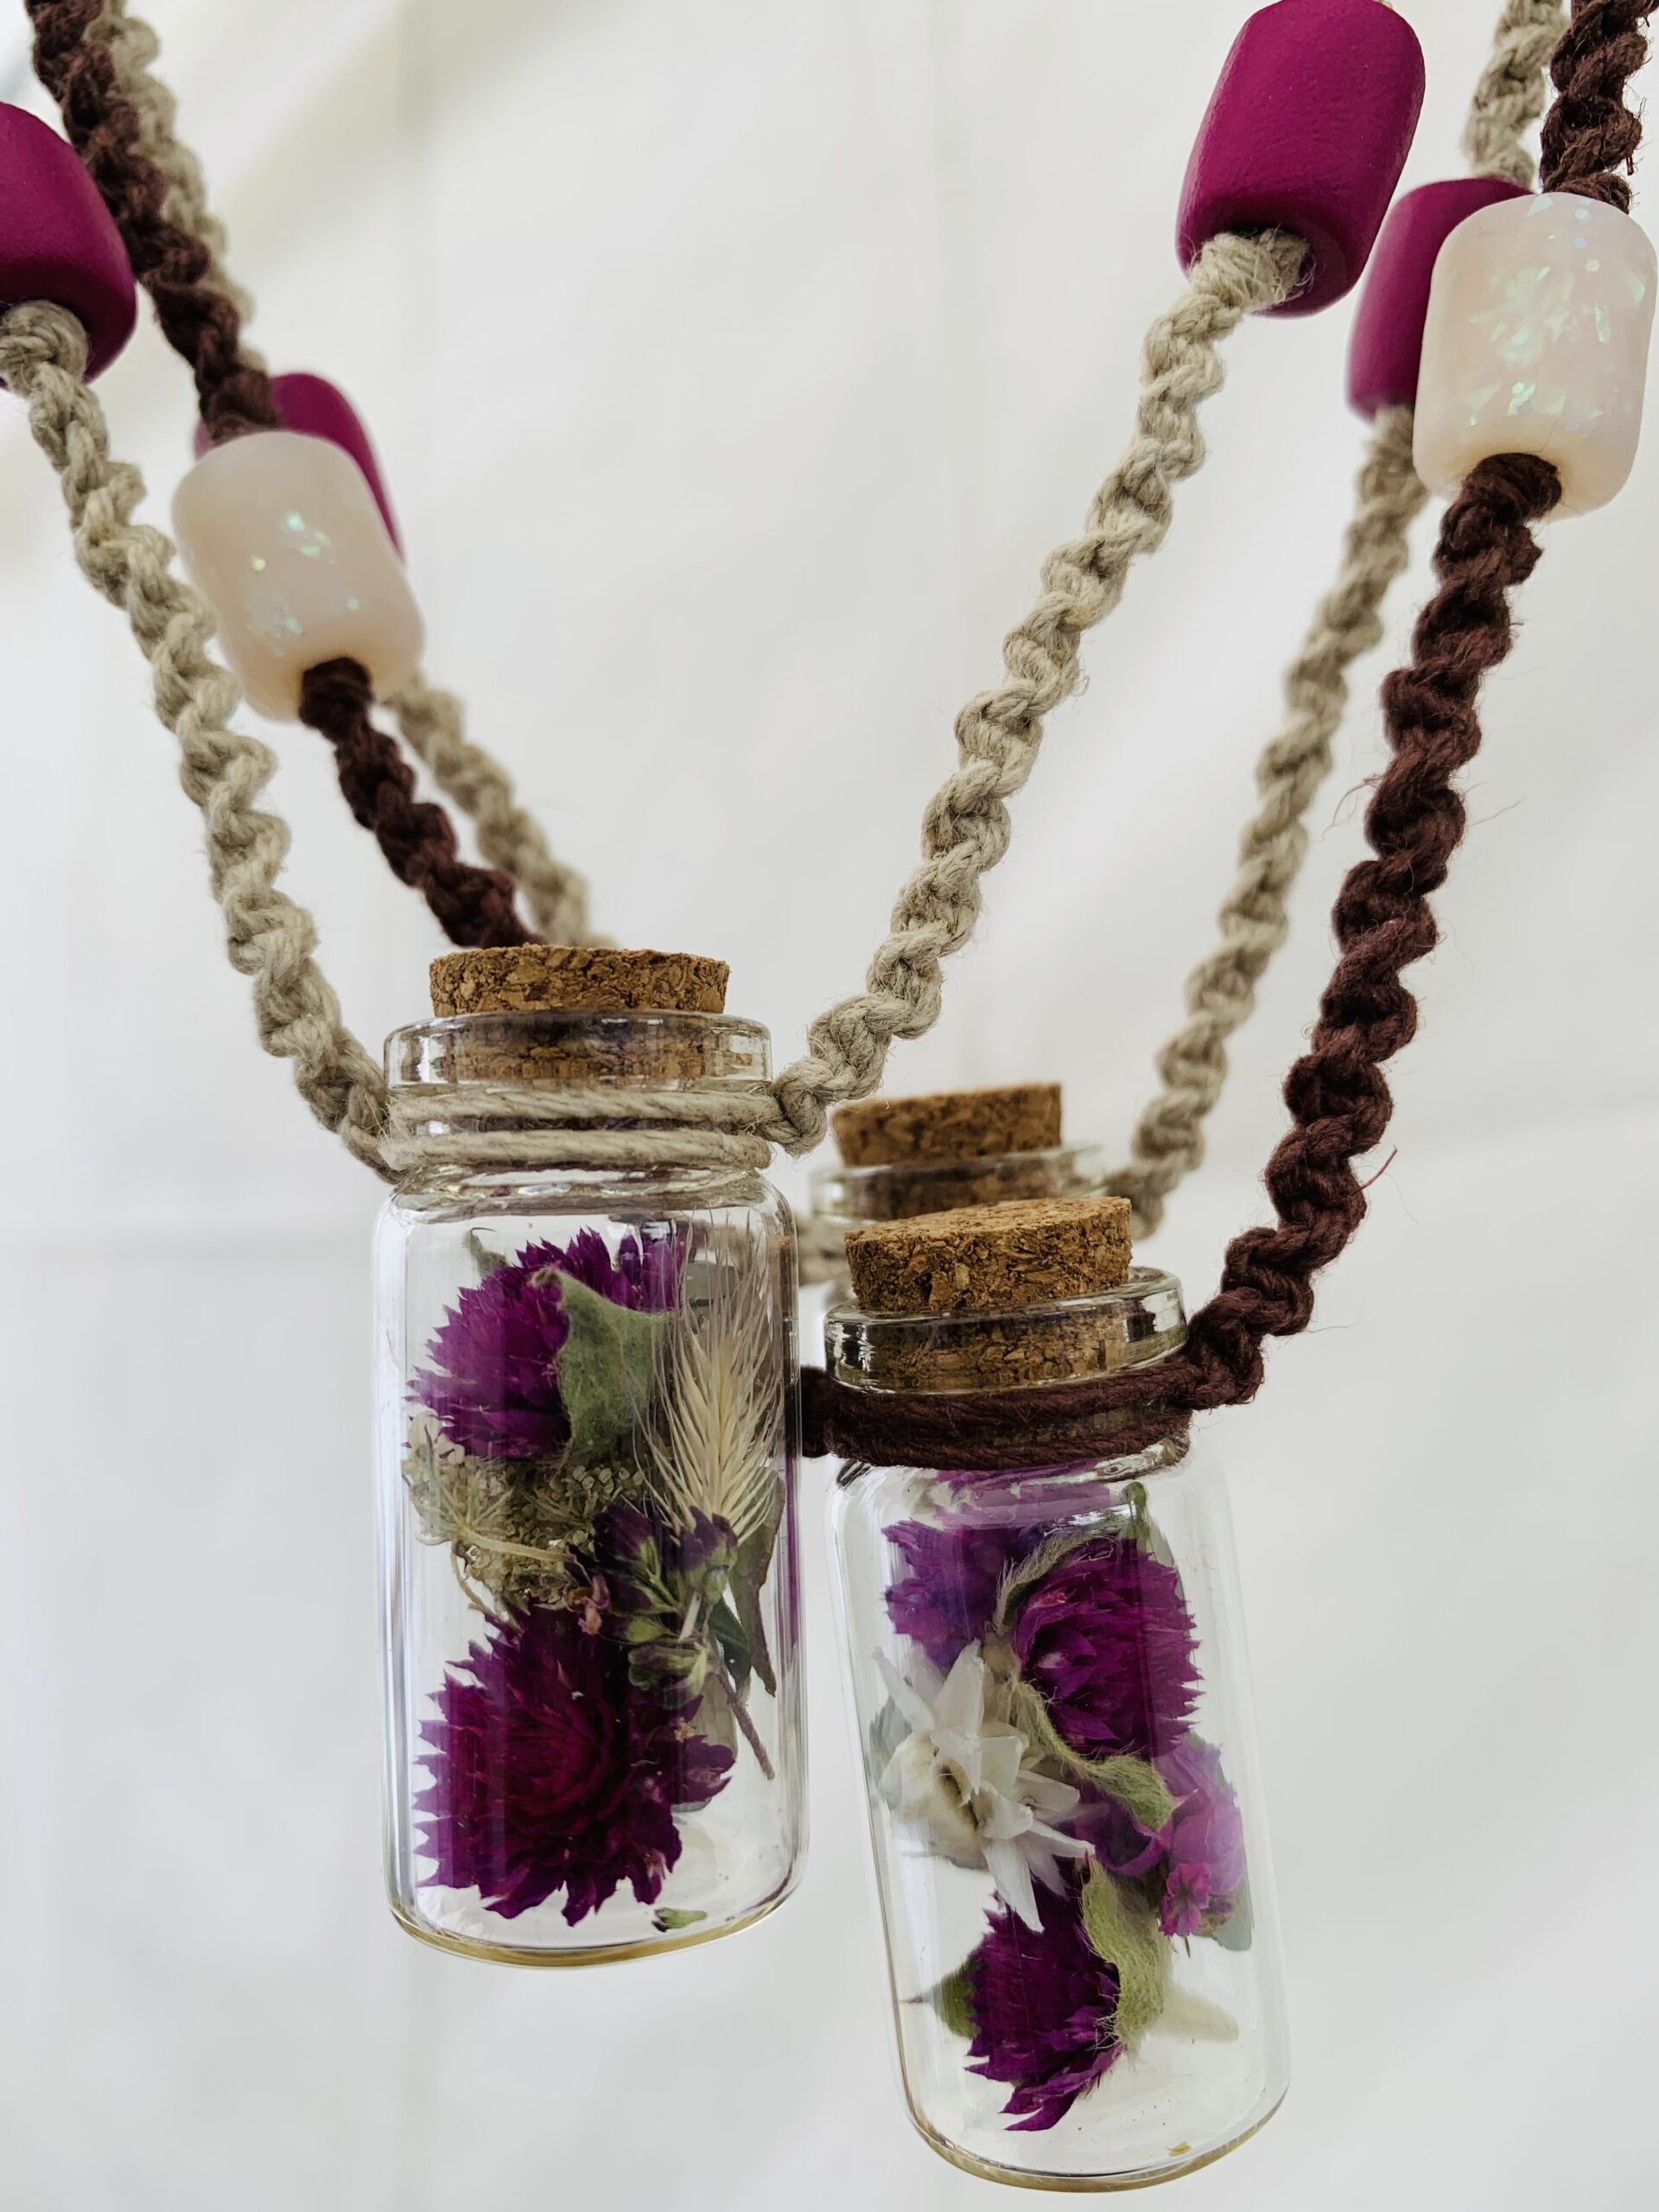 necklace with dried flowers